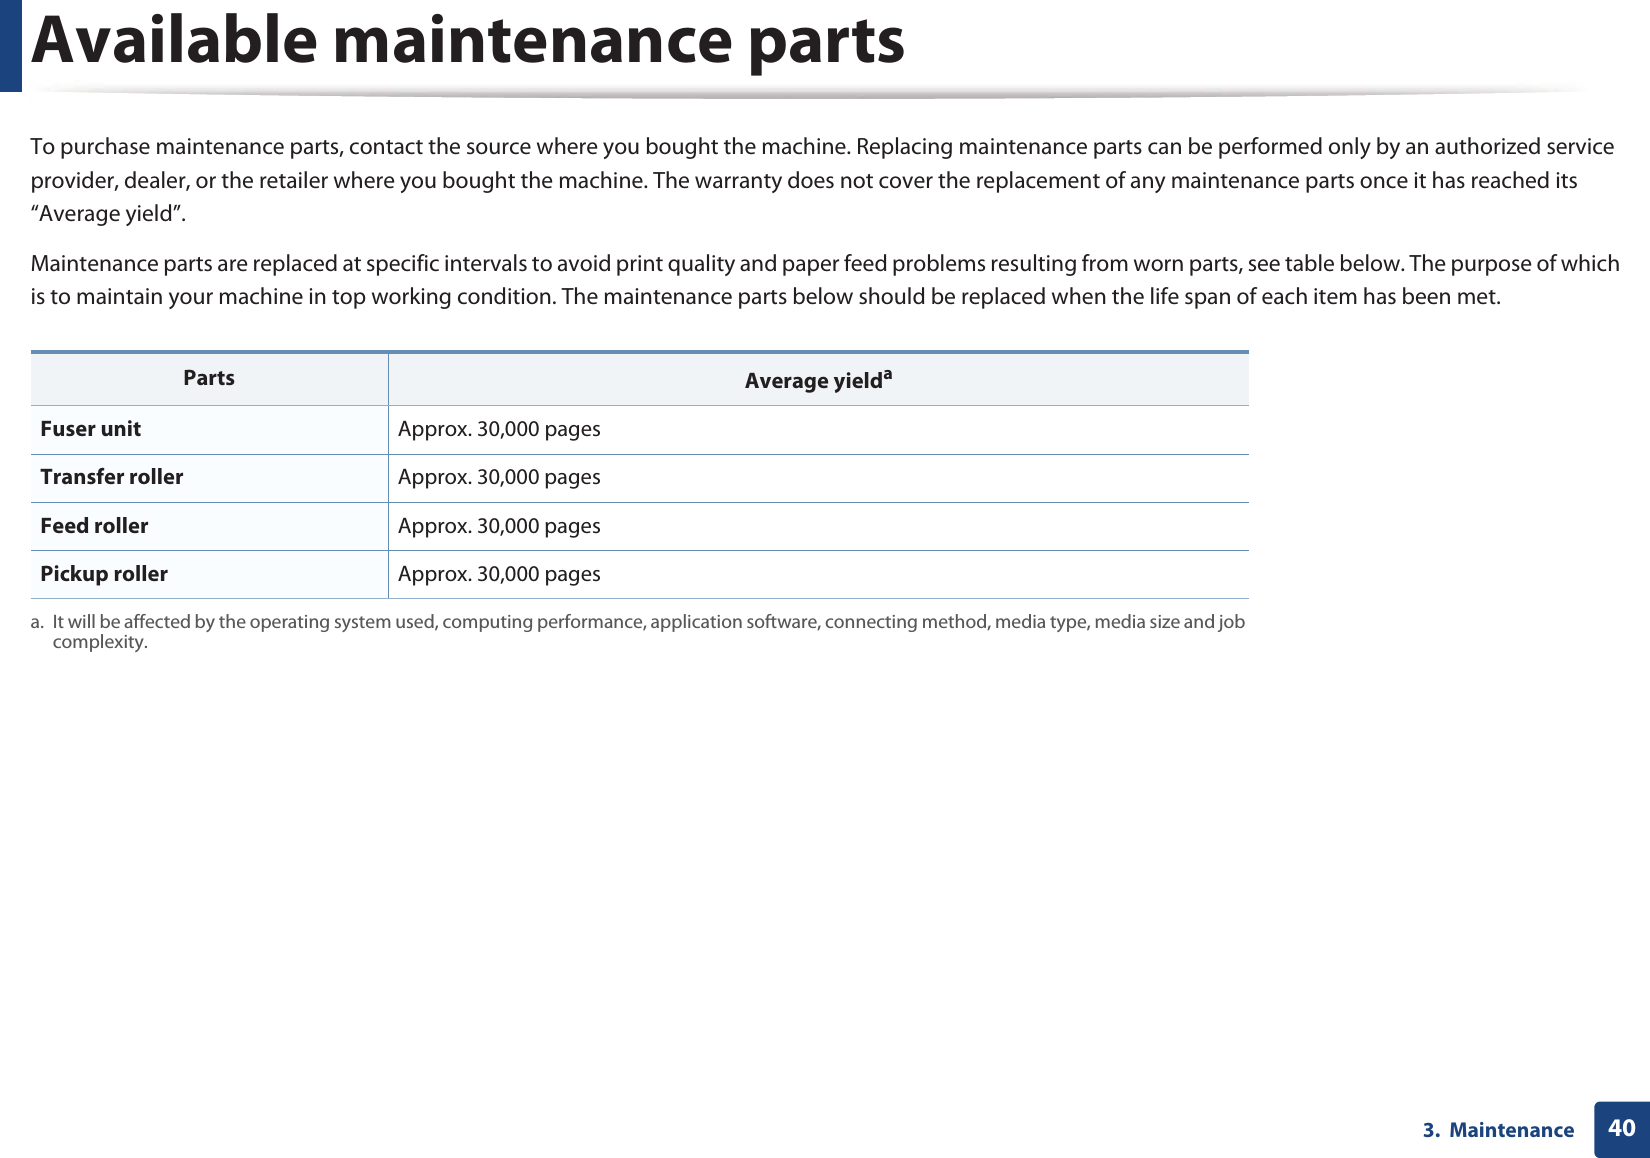 403.  MaintenanceAvailable maintenance partsTo purchase maintenance parts, contact the source where you bought the machine. Replacing maintenance parts can be performed only by an authorized service provider, dealer, or the retailer where you bought the machine. The warranty does not cover the replacement of any maintenance parts once it has reached its “Average yield”.Maintenance parts are replaced at specific intervals to avoid print quality and paper feed problems resulting from worn parts, see table below. The purpose of which is to maintain your machine in top working condition. The maintenance parts below should be replaced when the life span of each item has been met.Parts Average yieldaa. It will be affected by the operating system used, computing performance, application software, connecting method, media type, media size and job complexity.Fuser unit Approx. 30,000 pagesTransfer roller Approx. 30,000 pages Feed roller Approx. 30,000 pages Pickup roller Approx. 30,000 pages